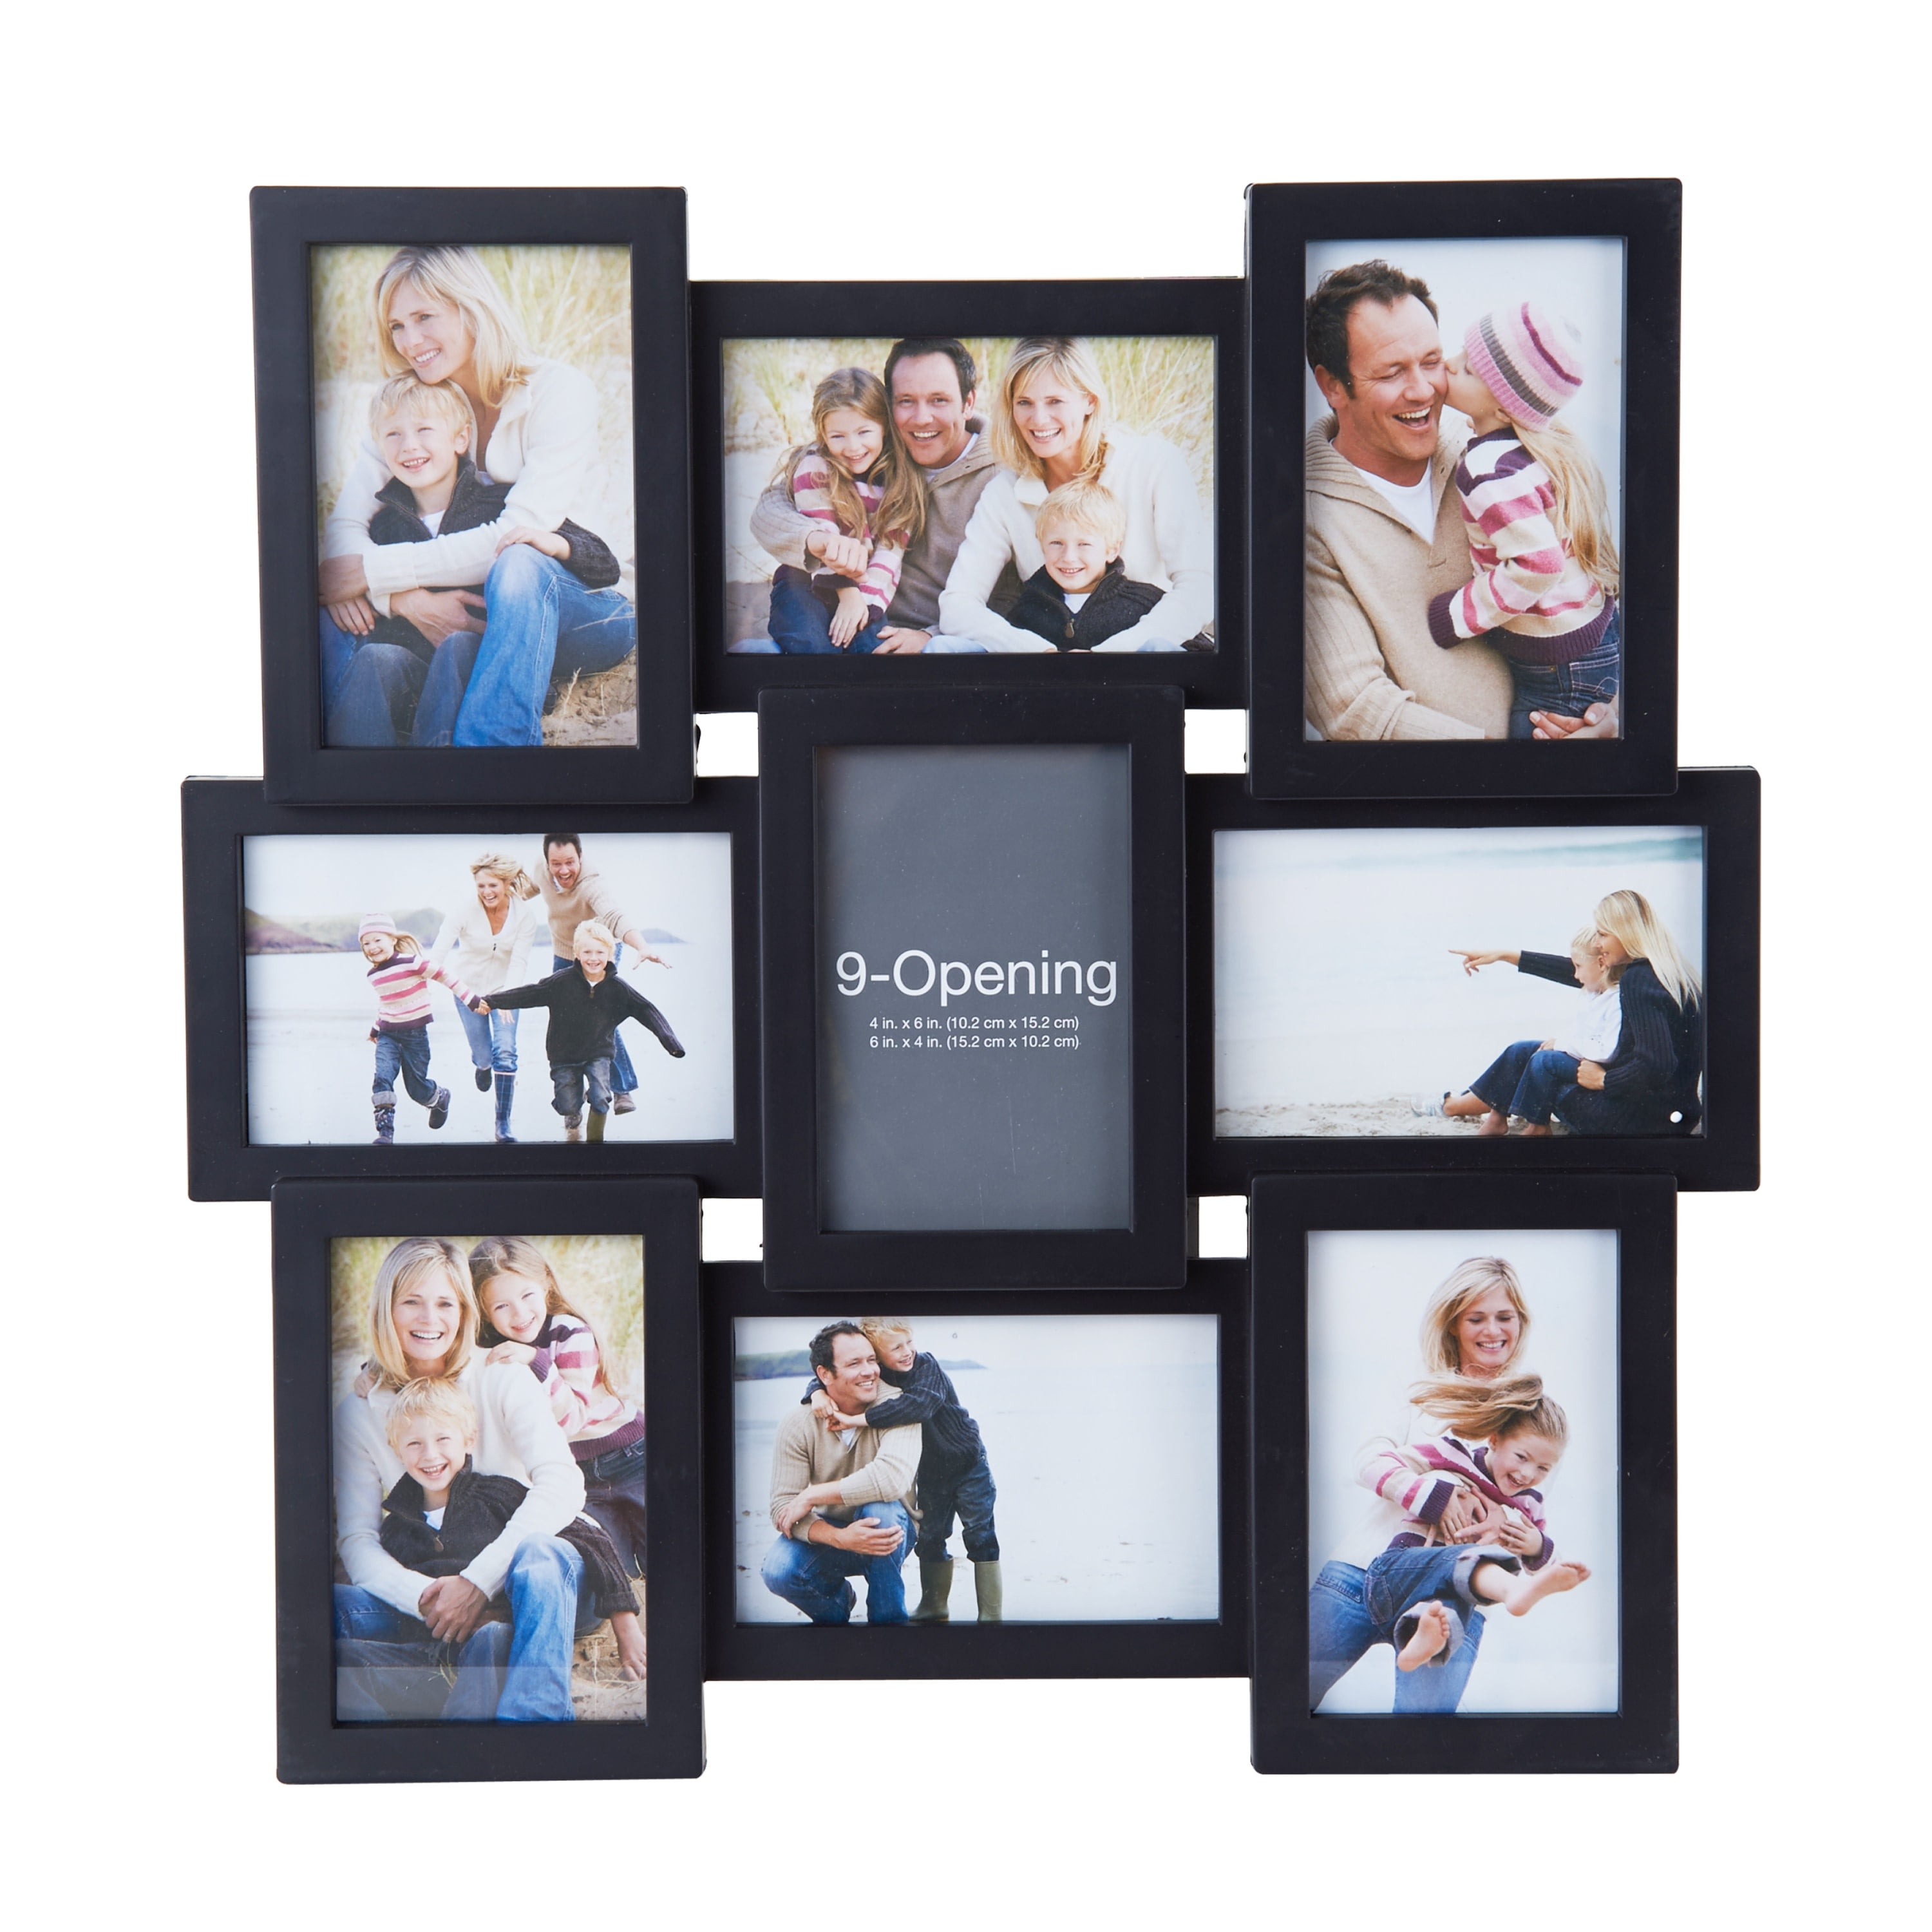 19 x 17 inch,Distressed Black Melannco Customizable Letterboard 8-Opening Photo Collage